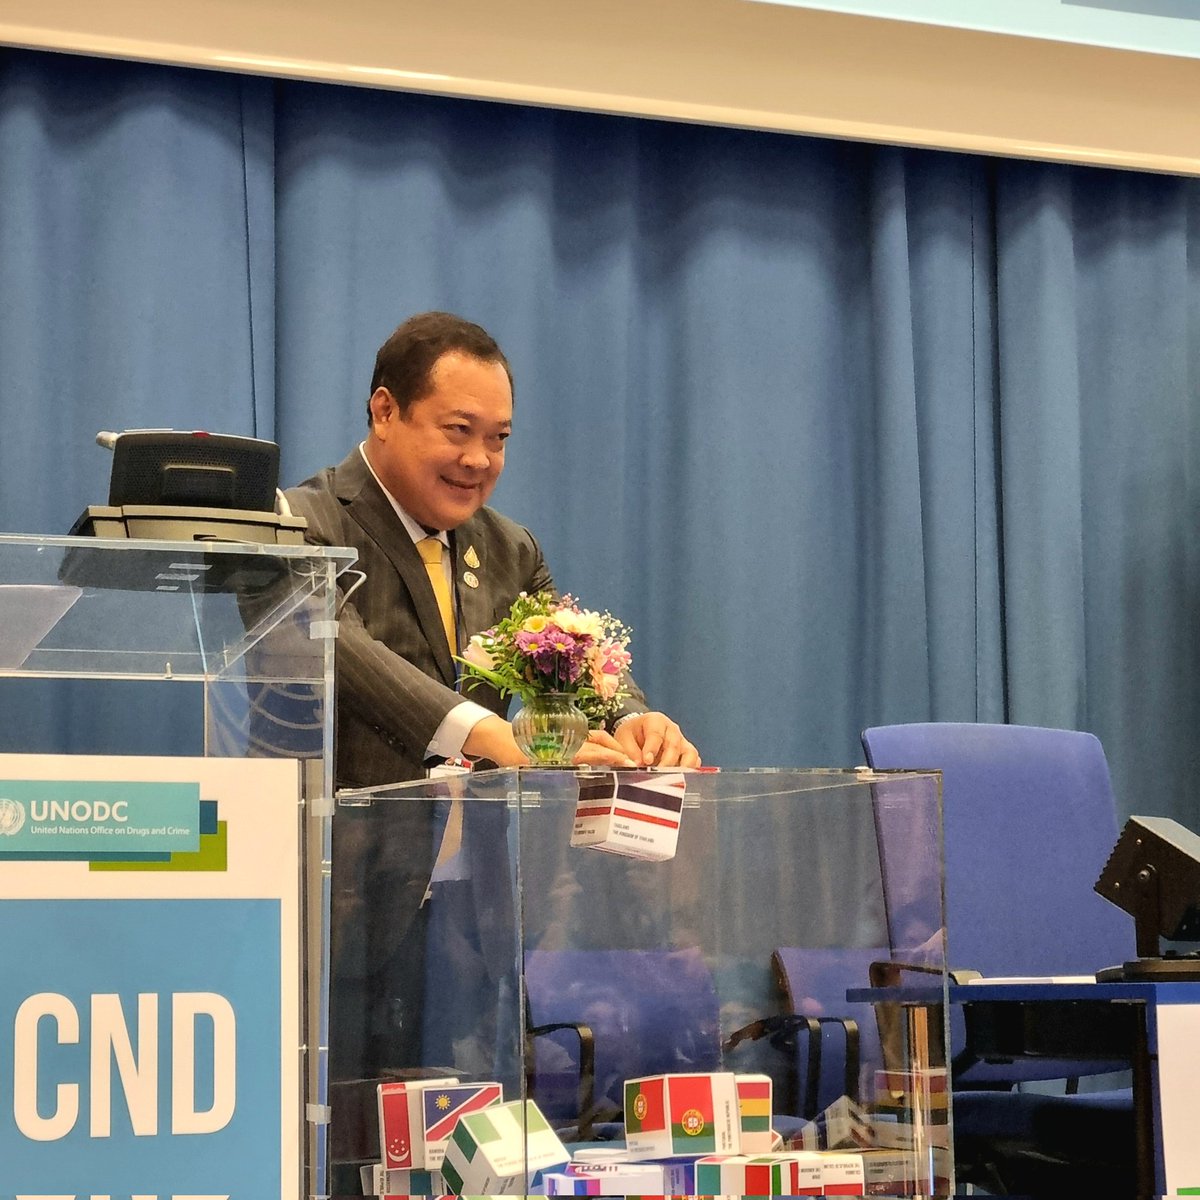 At #CND67 High-Level Segment, Justice Min Tawee Sodsong 🇹🇭 pledged for Thailand to, within 1 year, boost access to treatment and rehab; intensify interdiction efforts along the border; and increase international coop to address challenges in the Golden Triangle.
#Pledge4Action